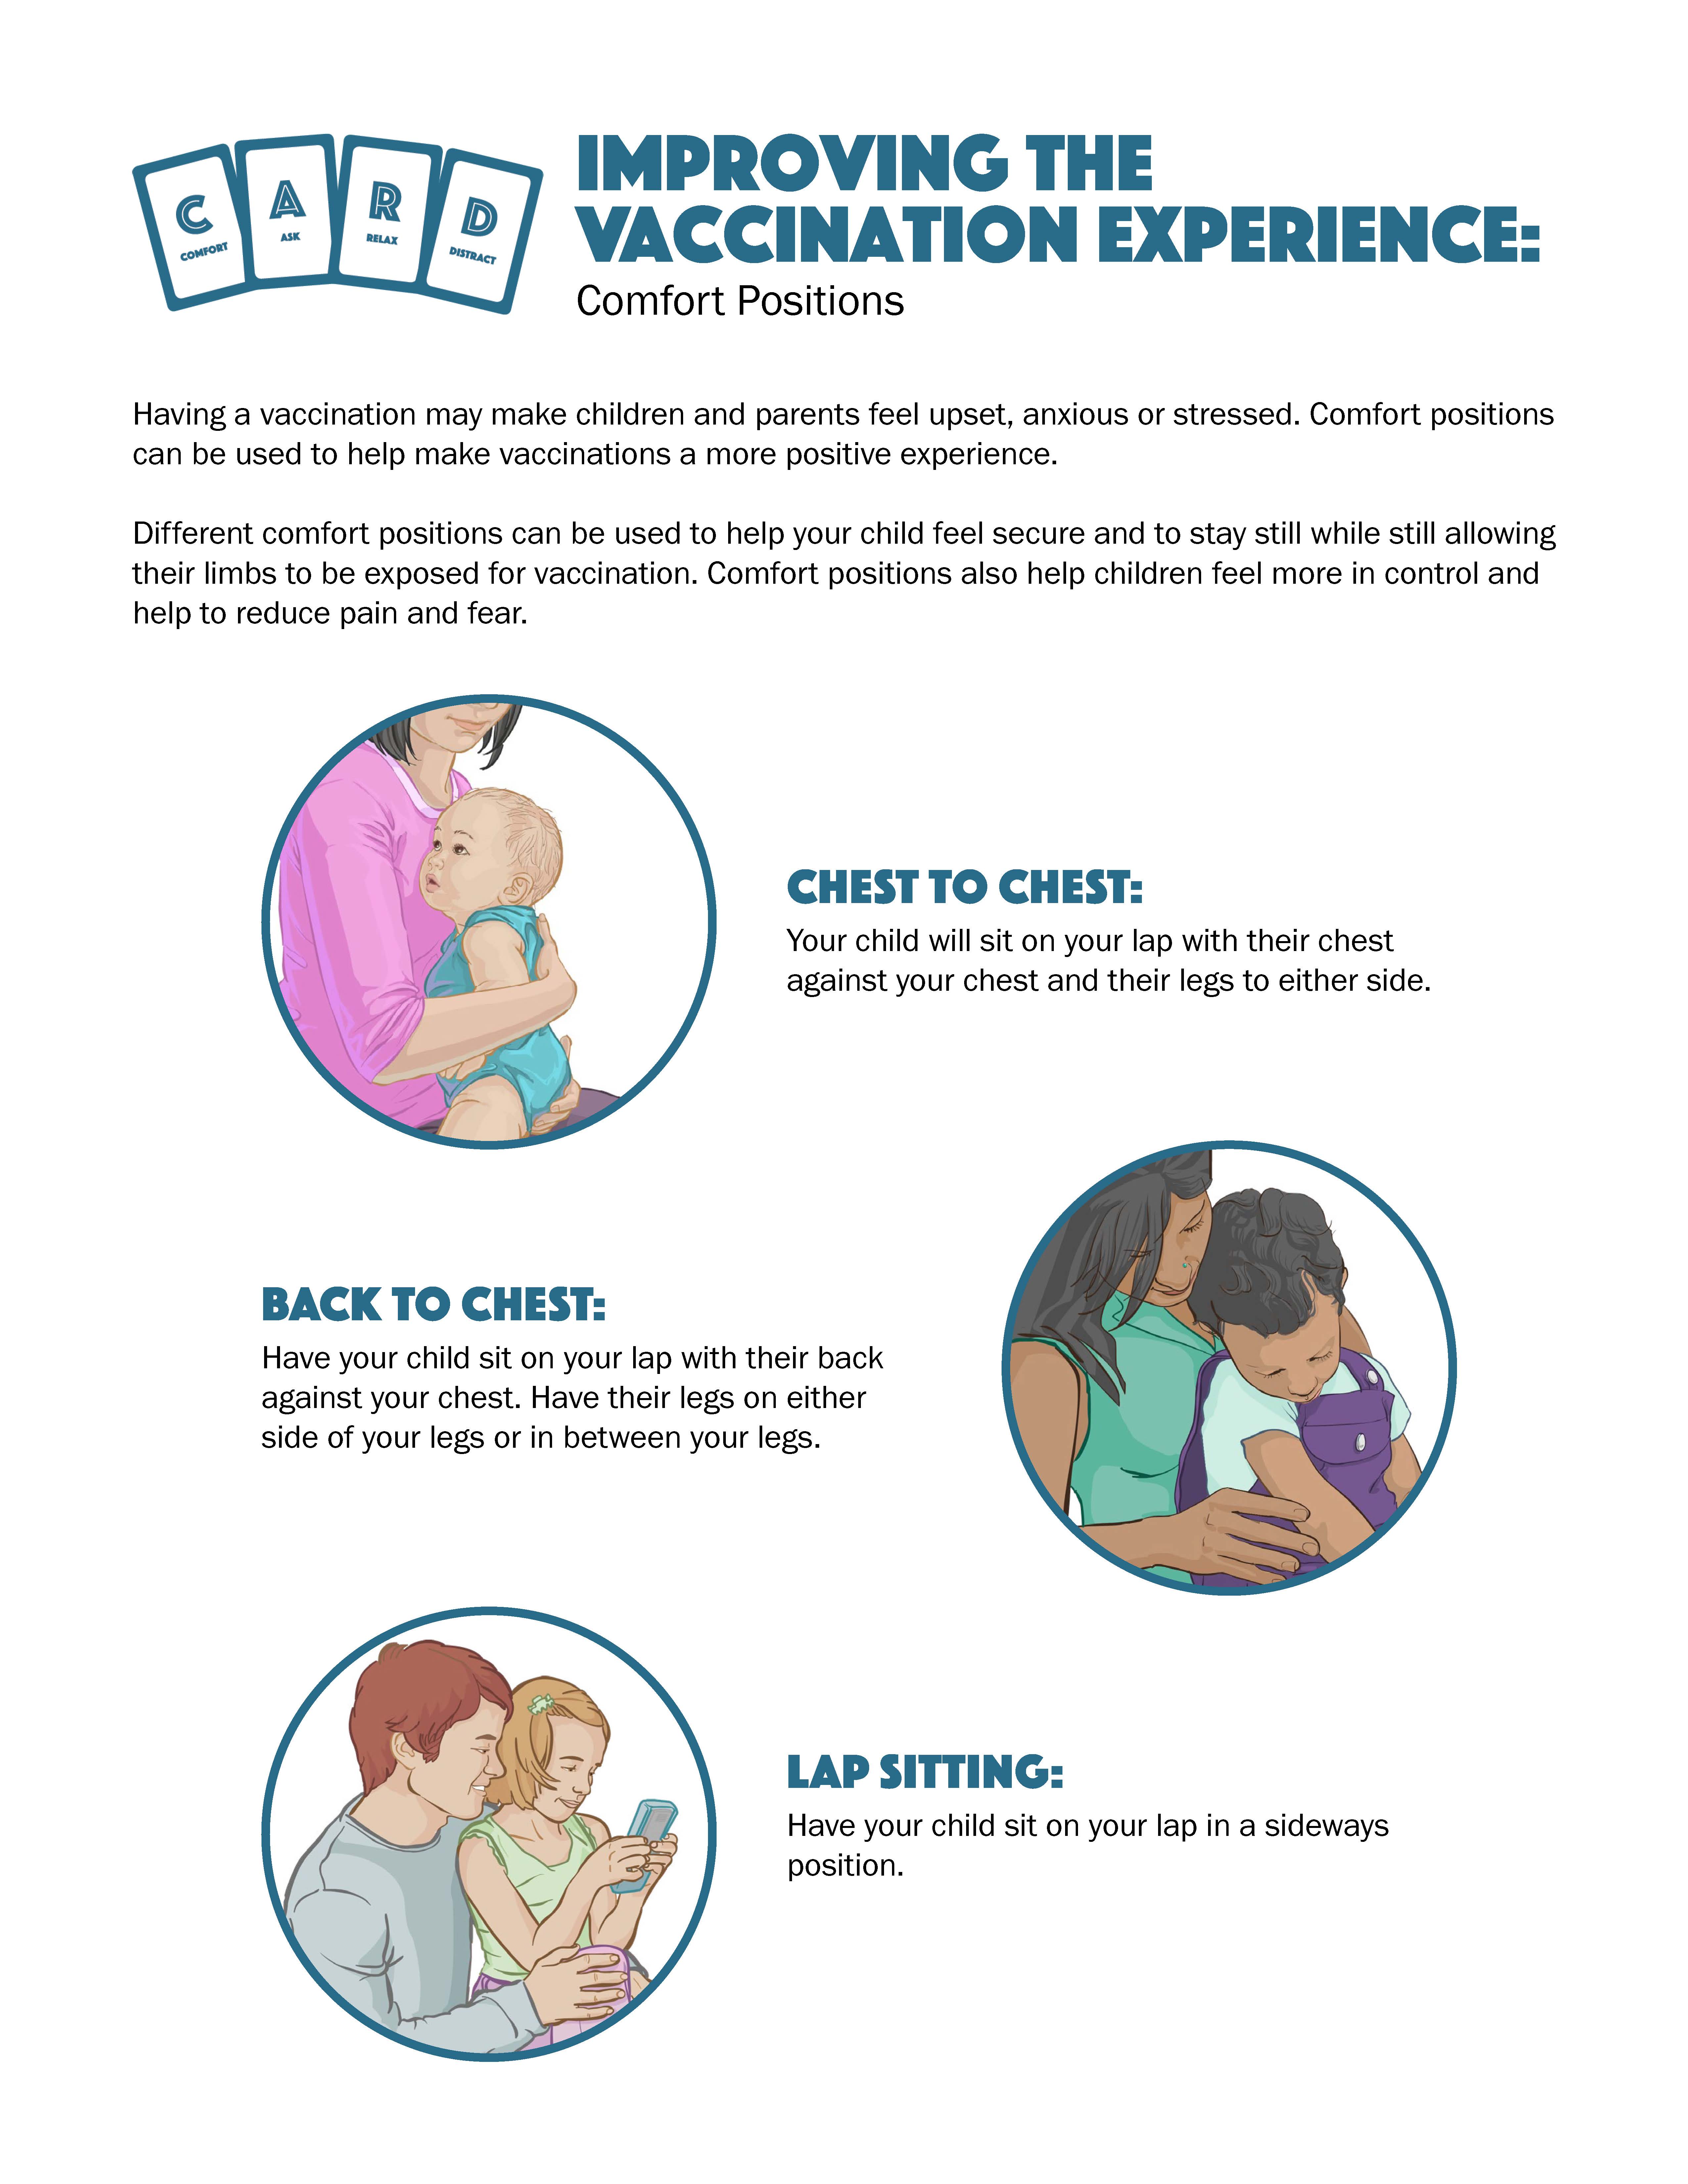 Comfort positions: Improving the vaccination experience